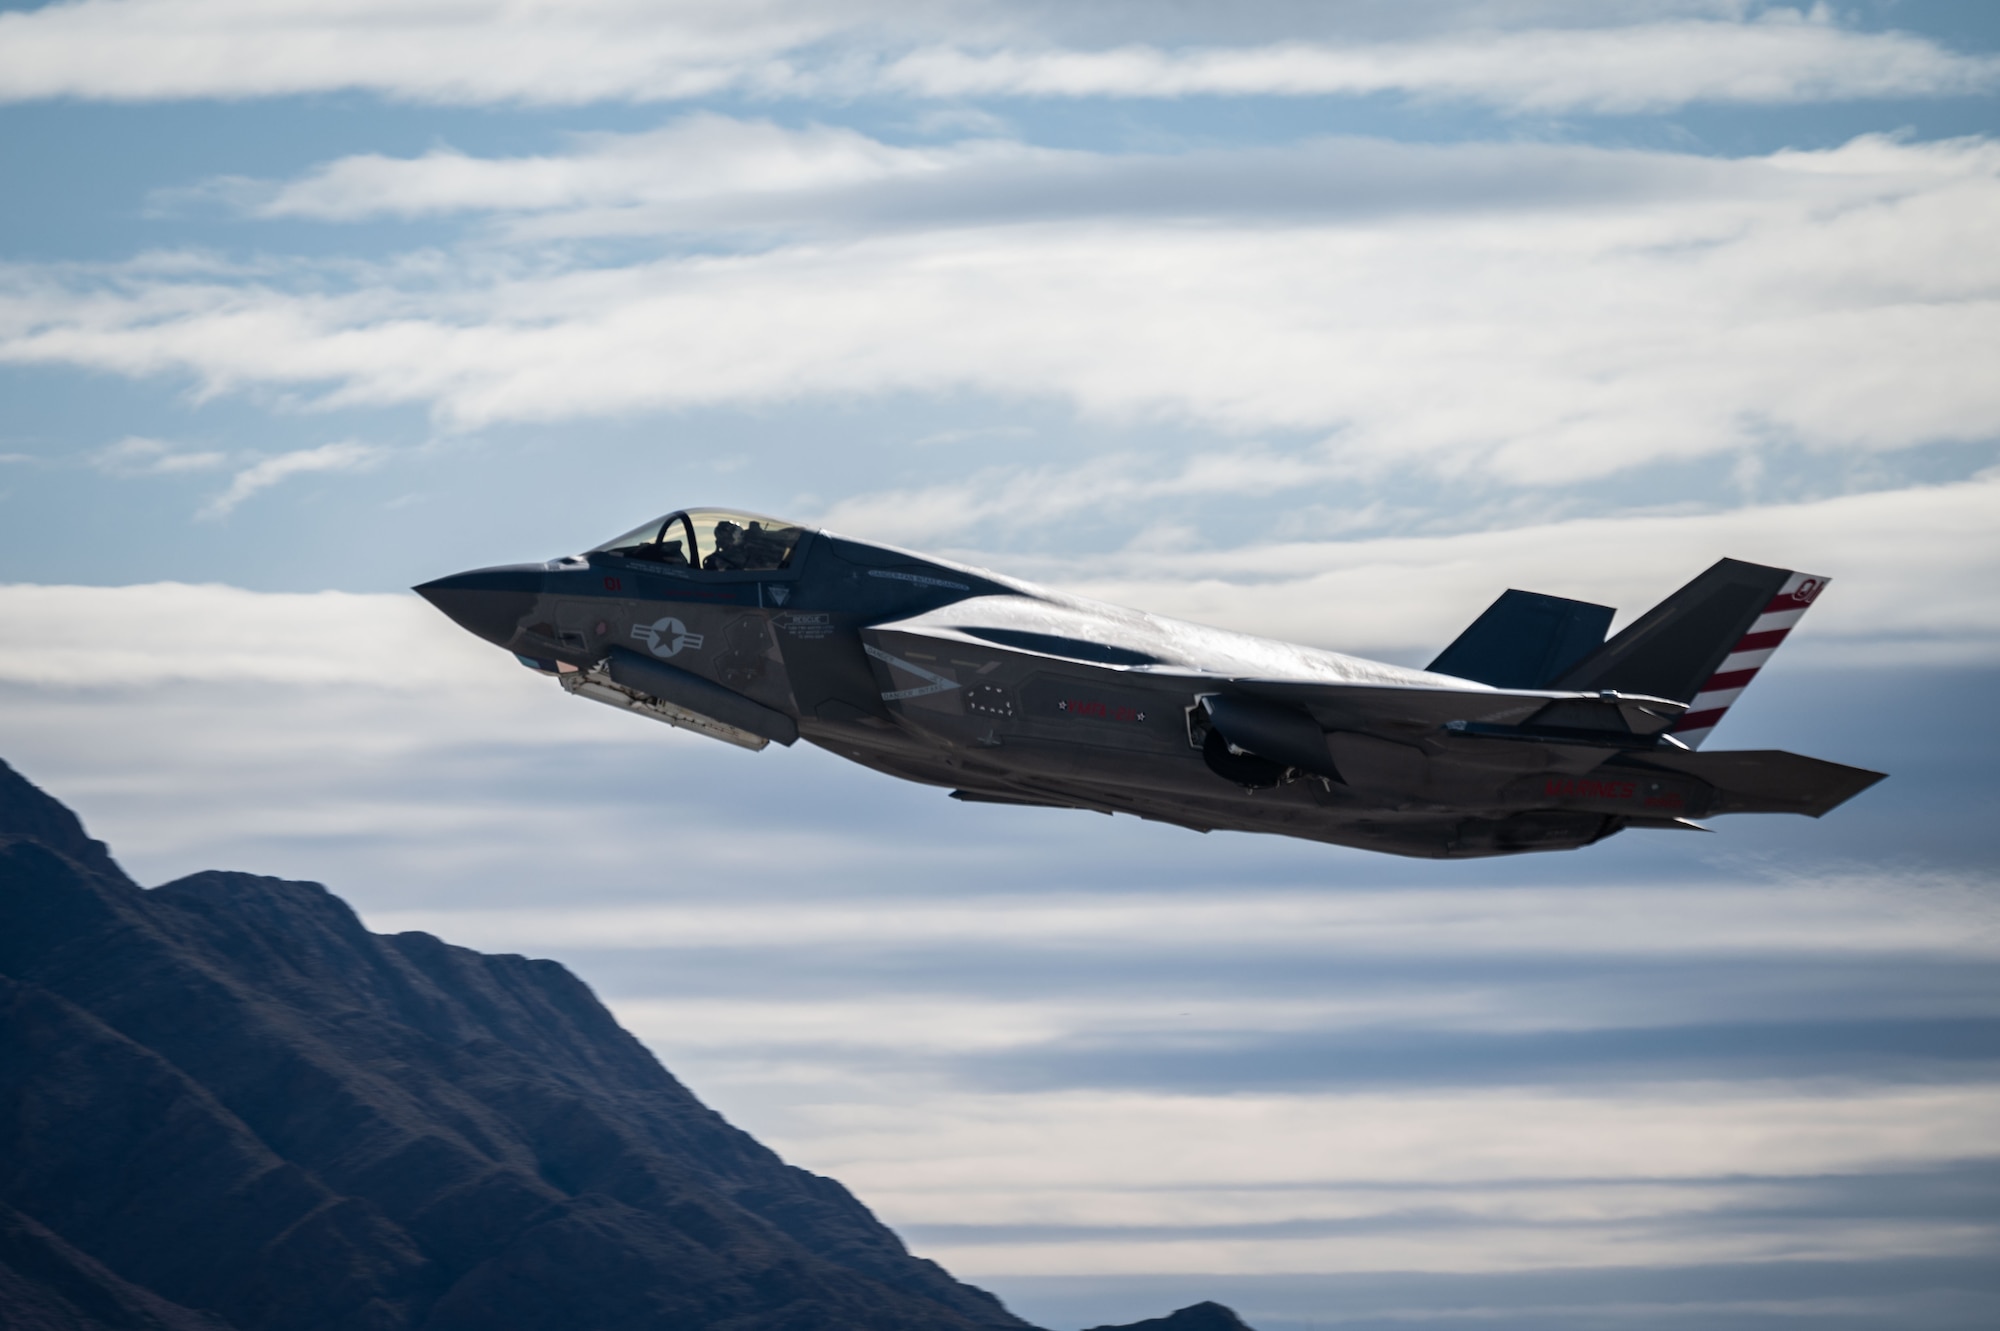 A U.S. Marine Corps F-35B from Marine Fighter Attack Squadron-211, Marine Corps Air Station Yuma, Arizona, takes off prior to the start of Red Flag 23-1 at Nellis Air Force Base, Nev., Jan 19, 2023.